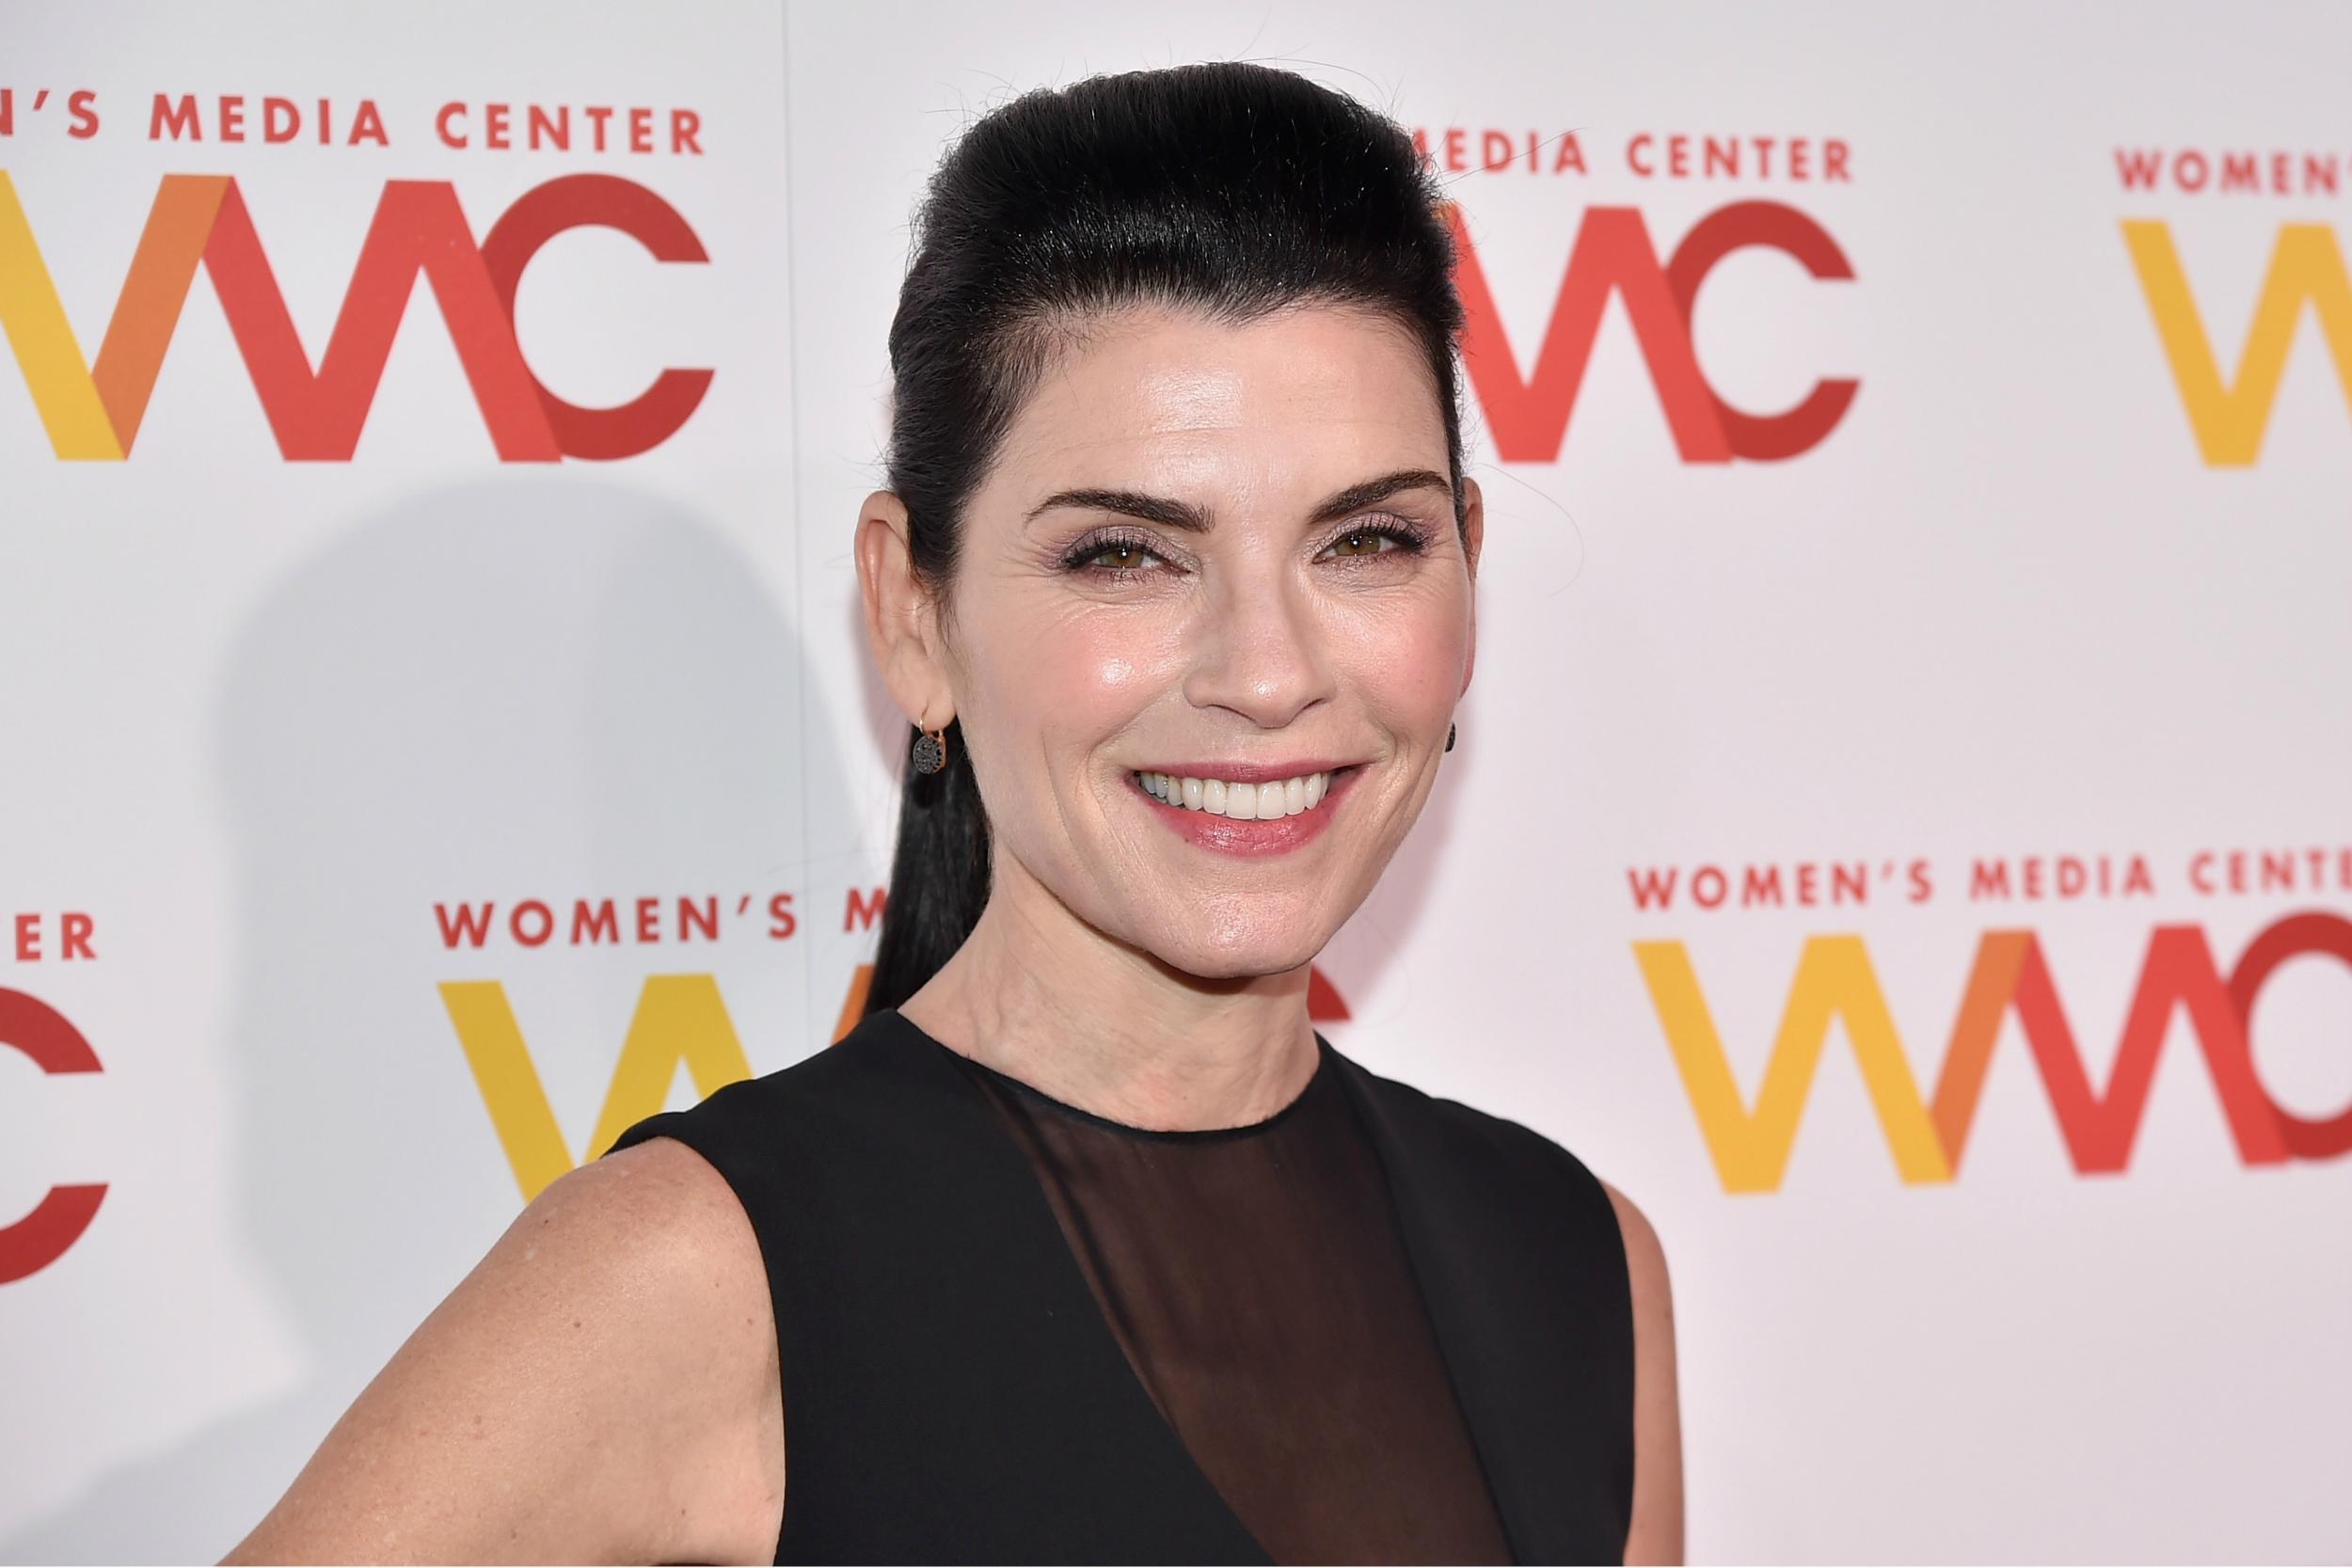 Julianna Margulies recounts experiences Harvey Weinstein and Steven Seagal The Independent The Independent pic